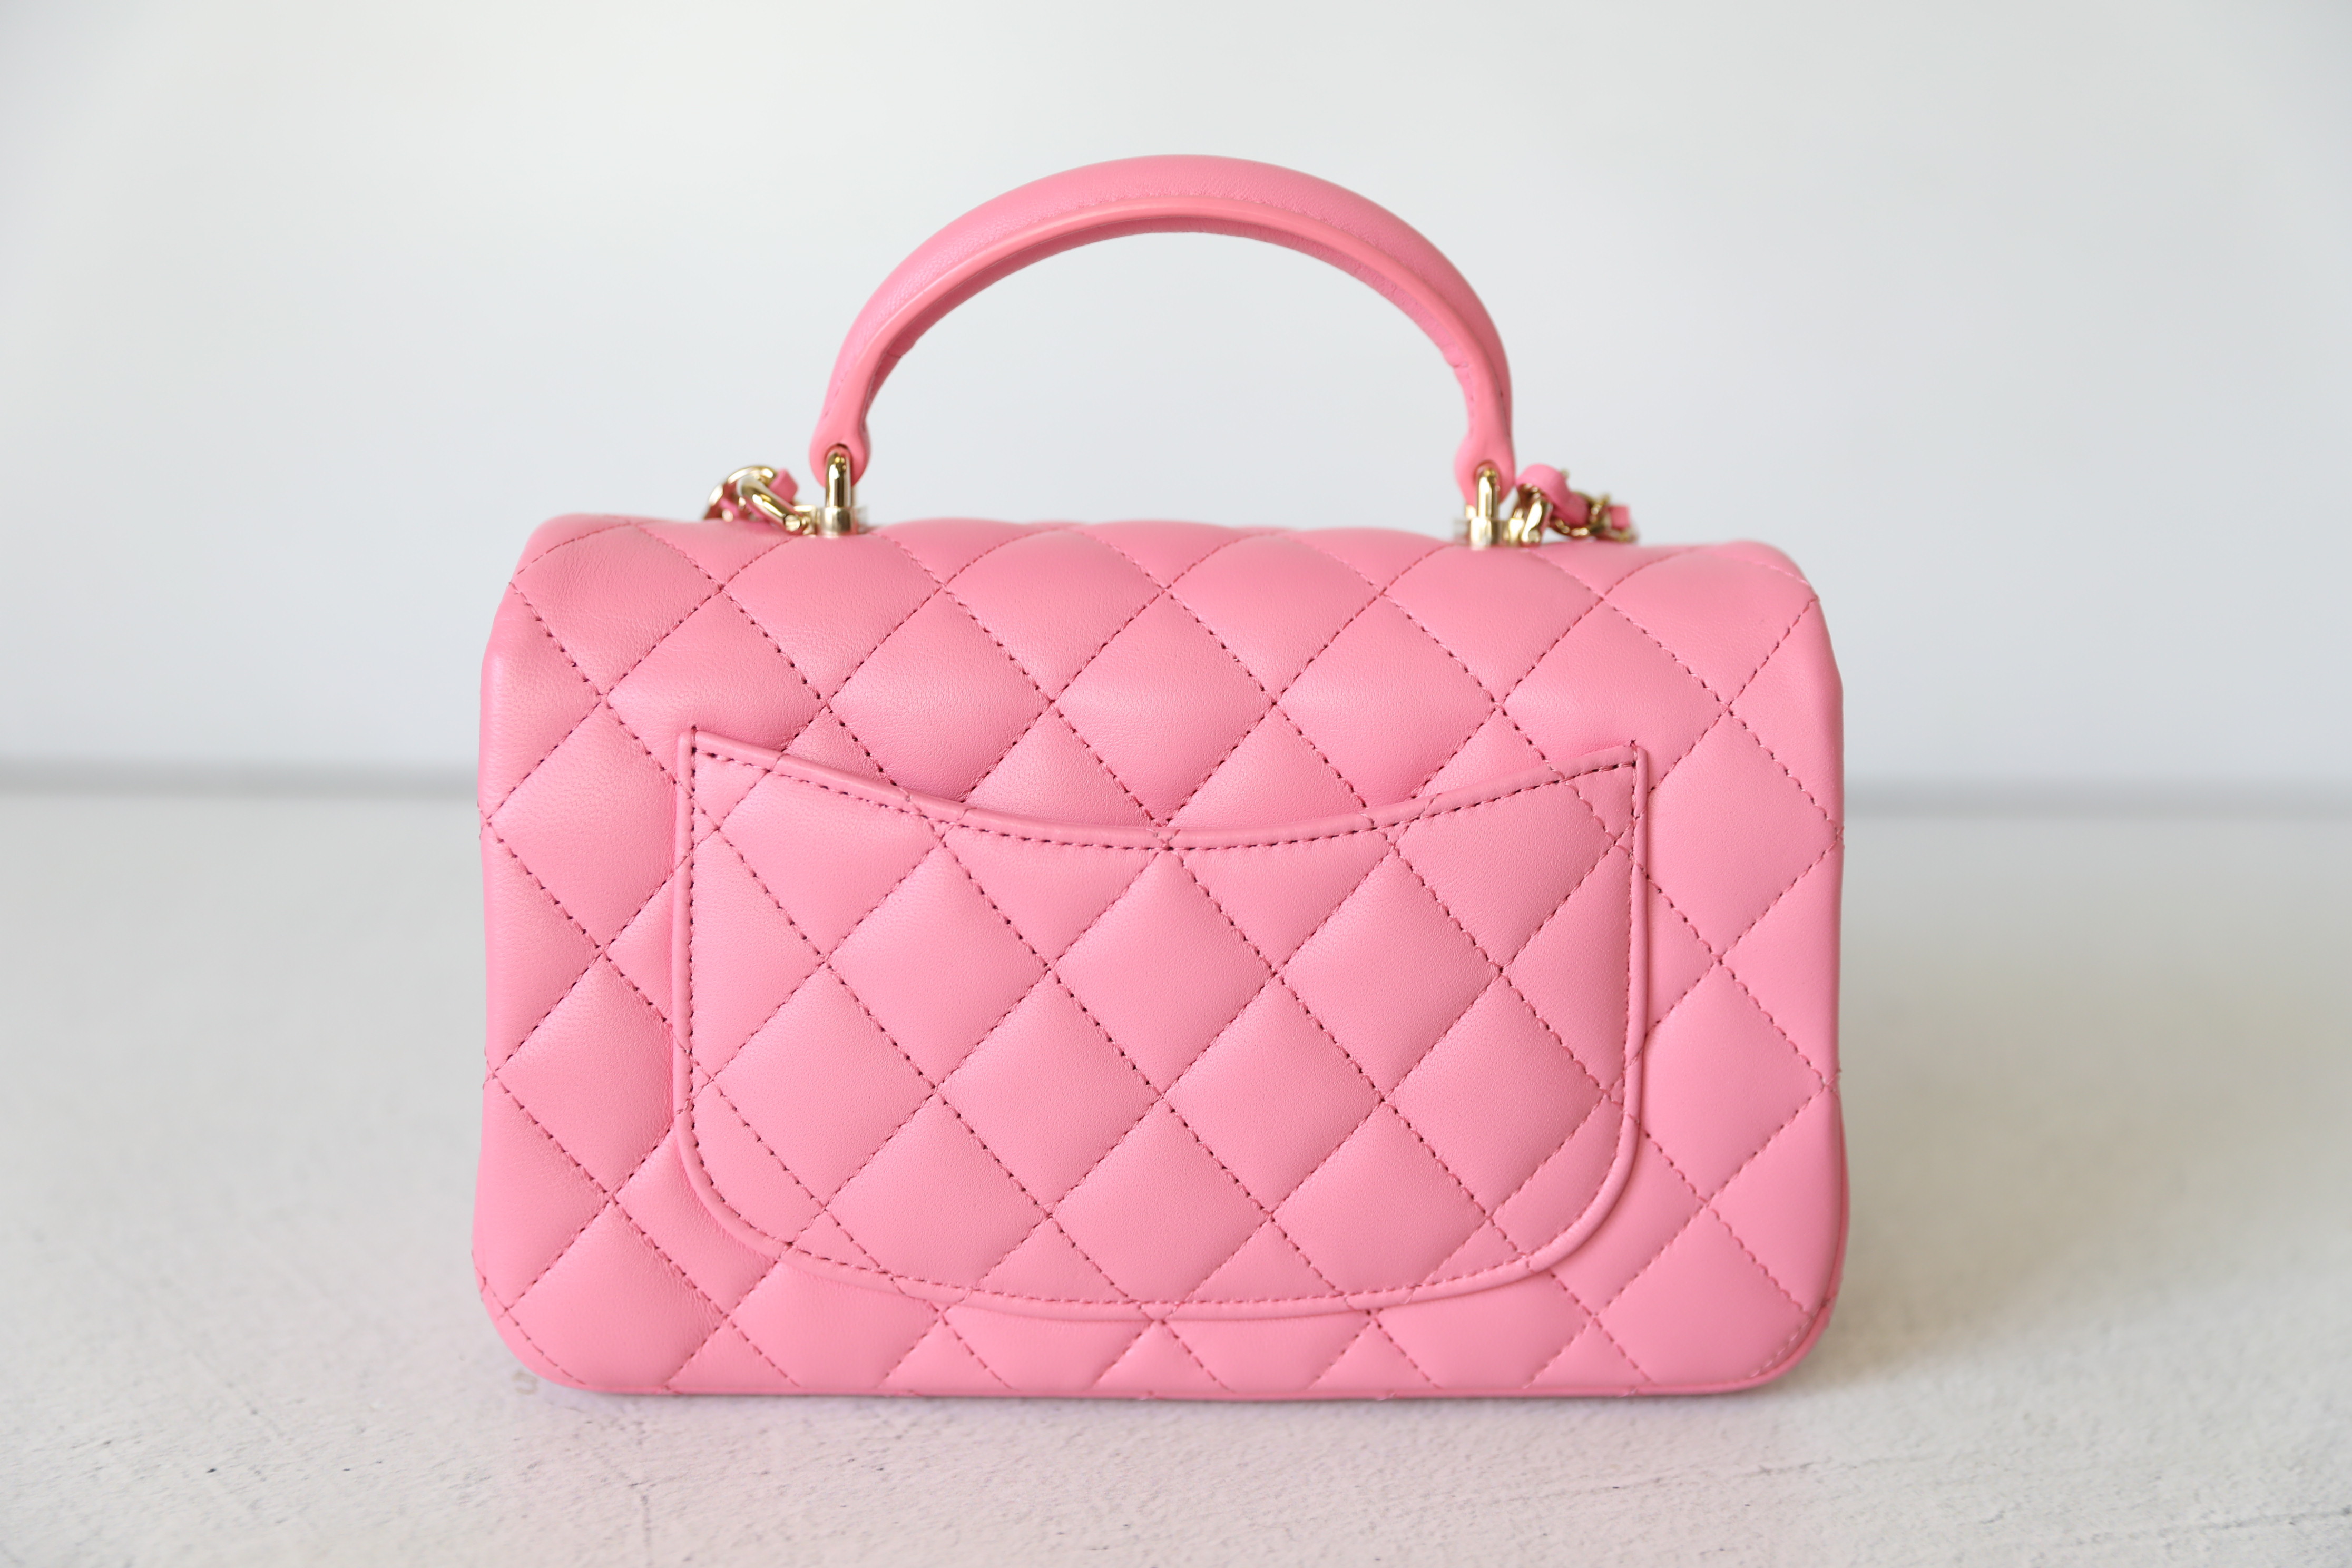 Chanel Round Top Handle Bag, Pink Caviar Leather, Gold Hardware, New in Box  MA001 - Julia Rose Boston